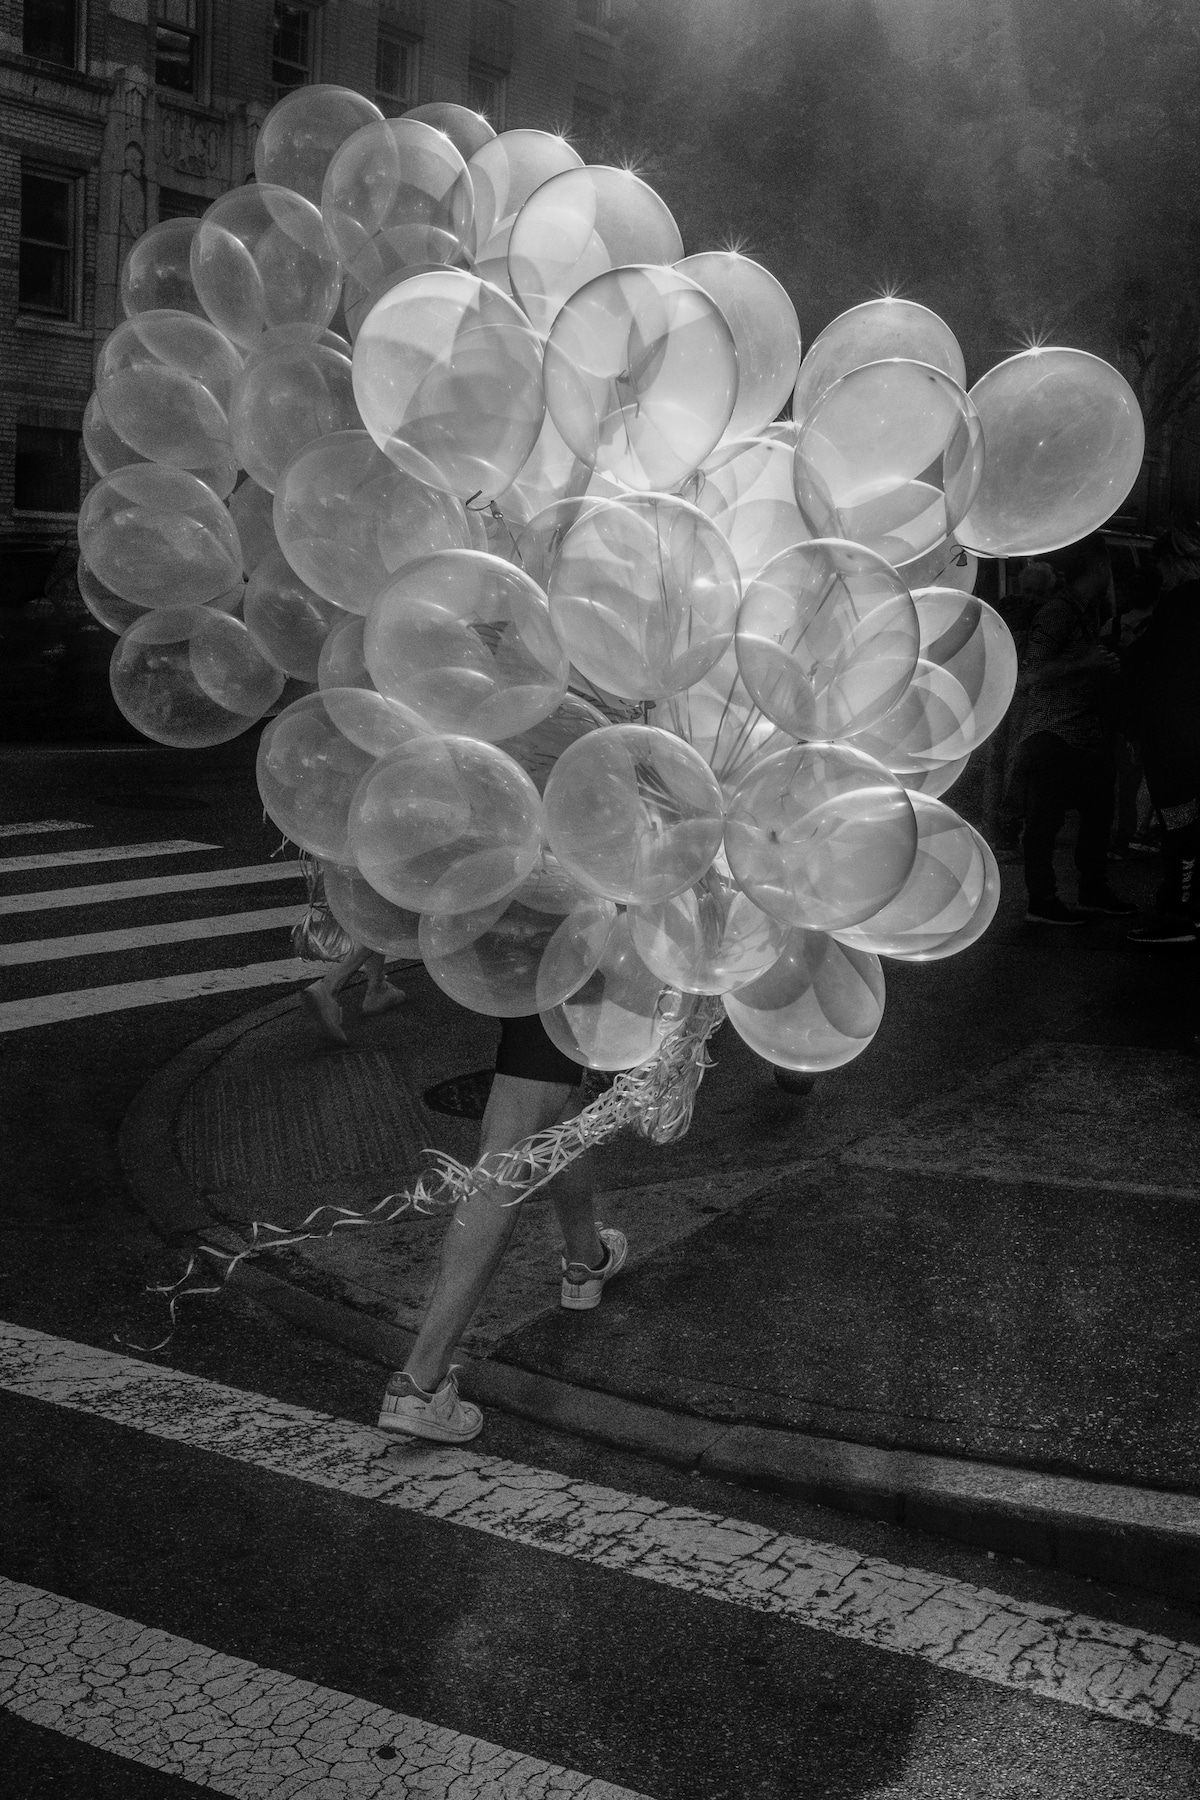 Black and White Photo of Person Carrying Bunch of Balloons Across the Street